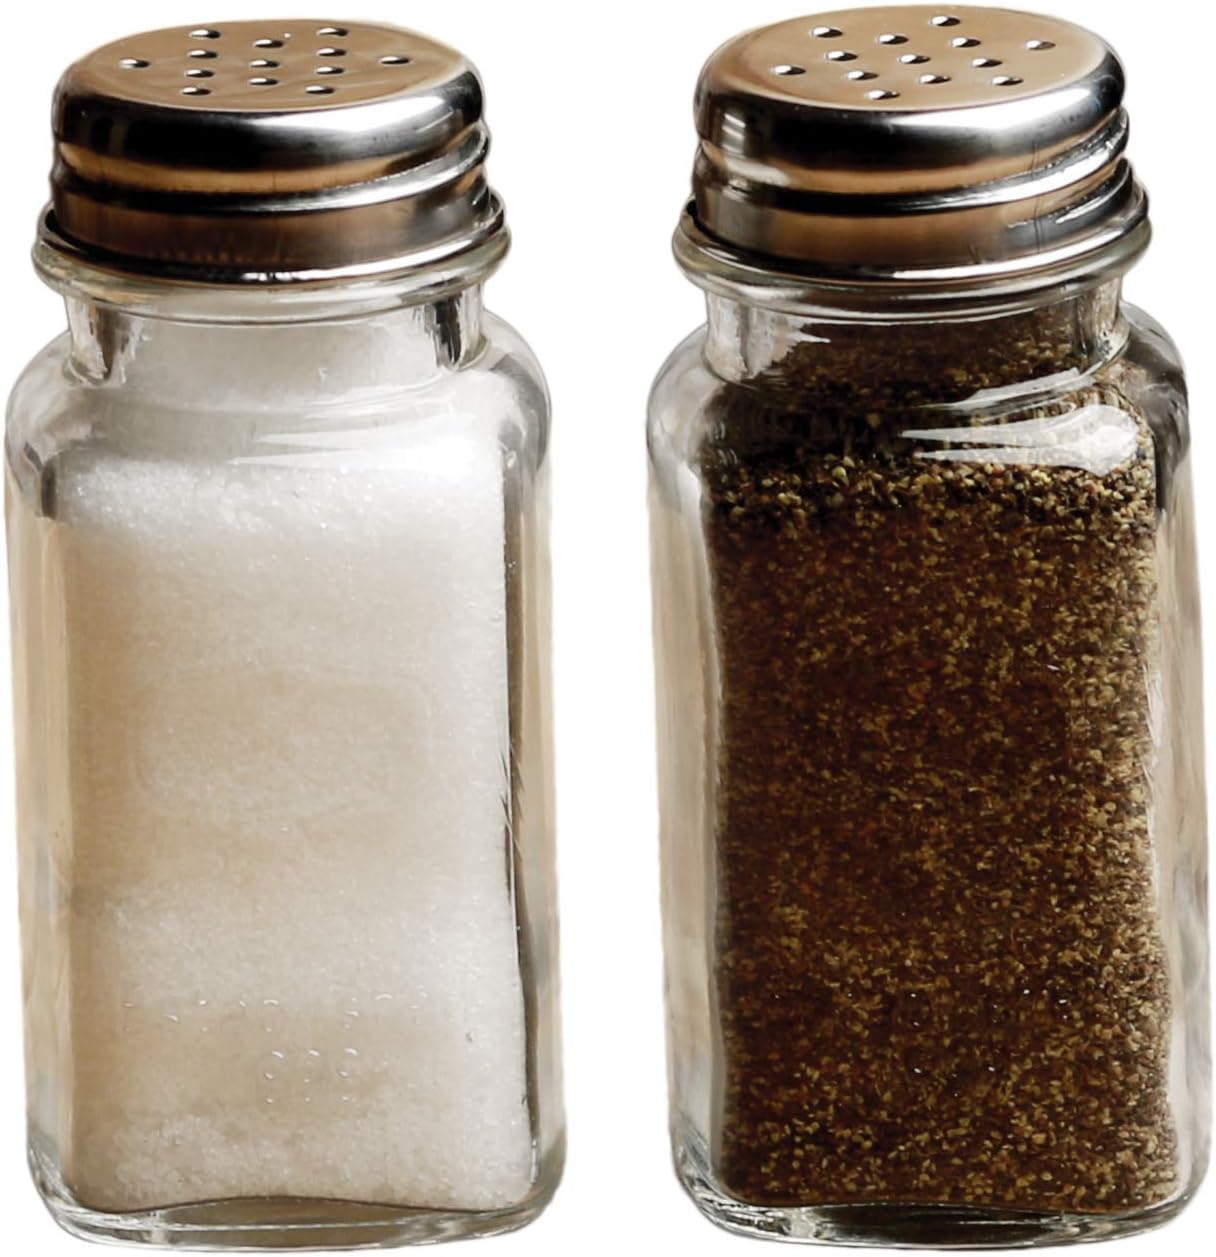 Circleware Yorkshire Salt and Pepper Shakers, 2-Piece Set, Home and Kitchen Utensils, 2.85 oz, Plain